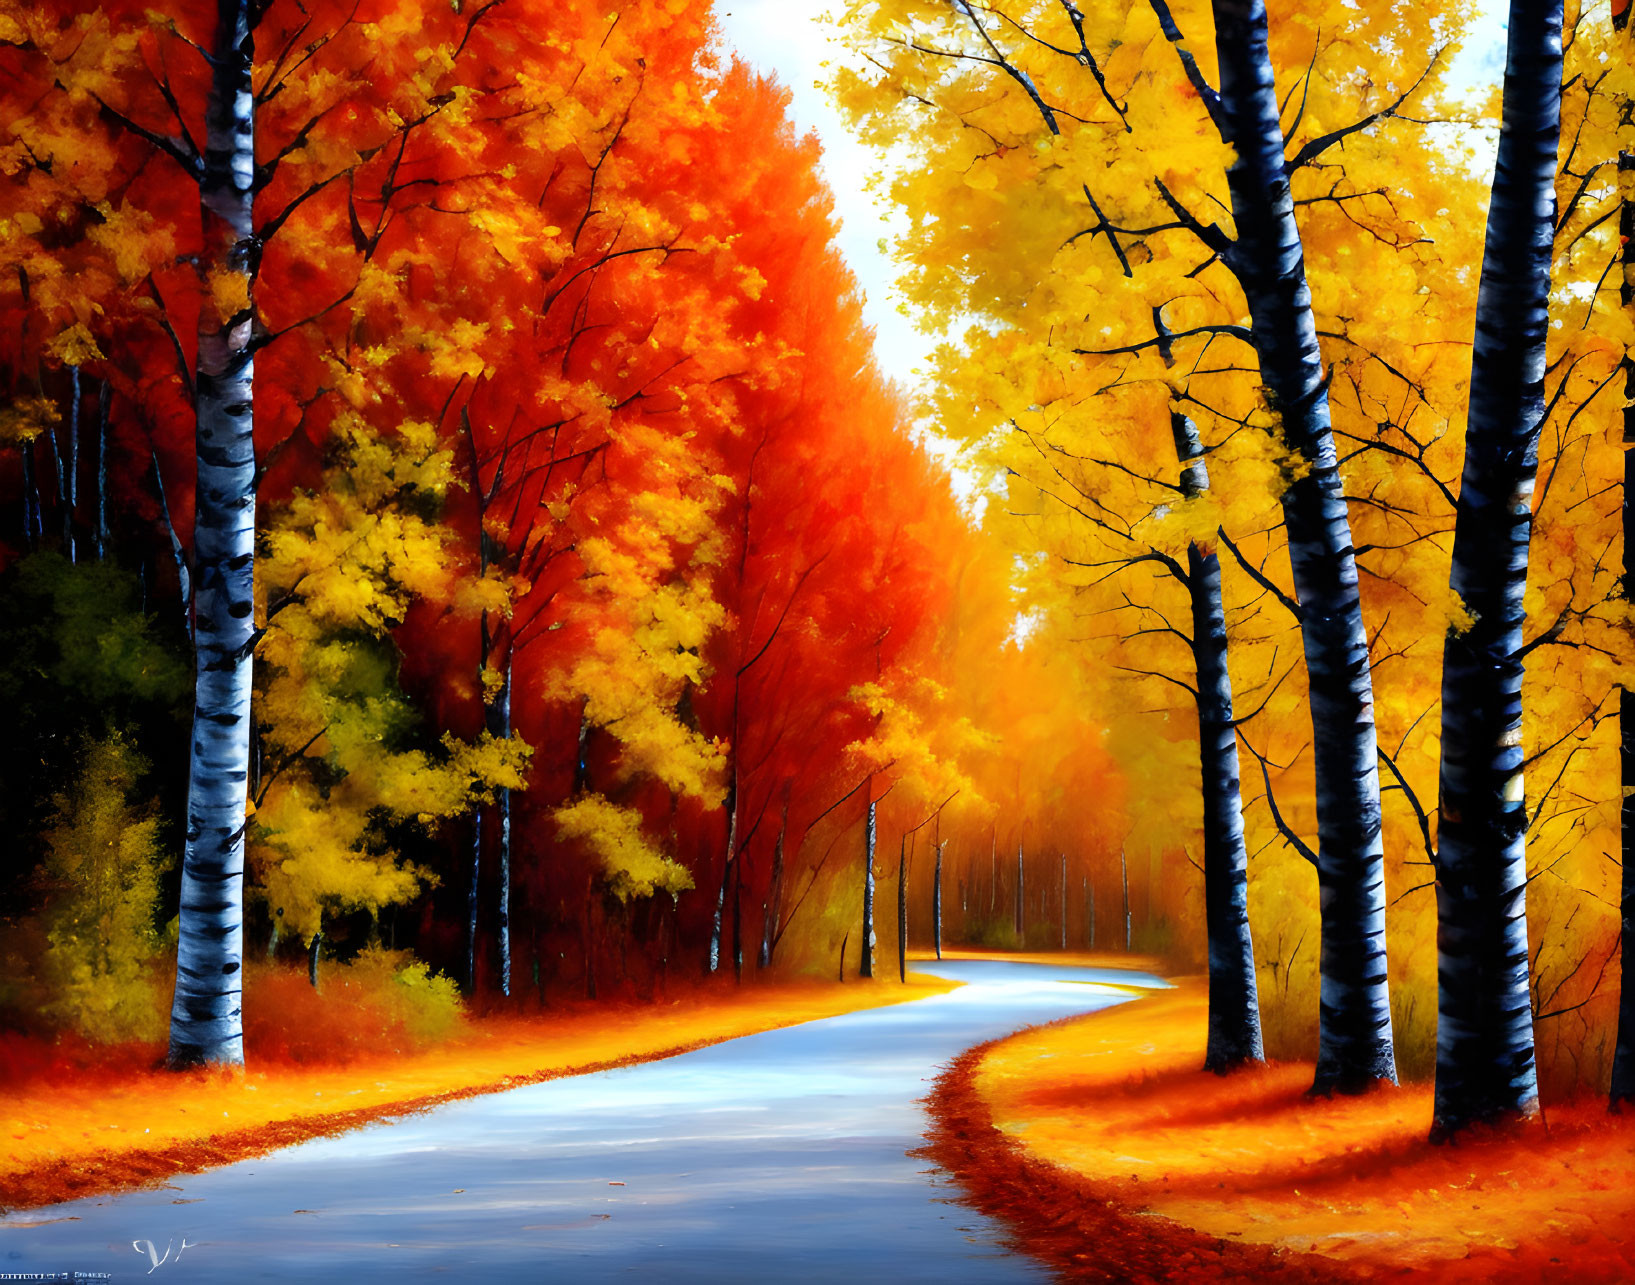 Scenic autumn forest with vibrant foliage and winding road